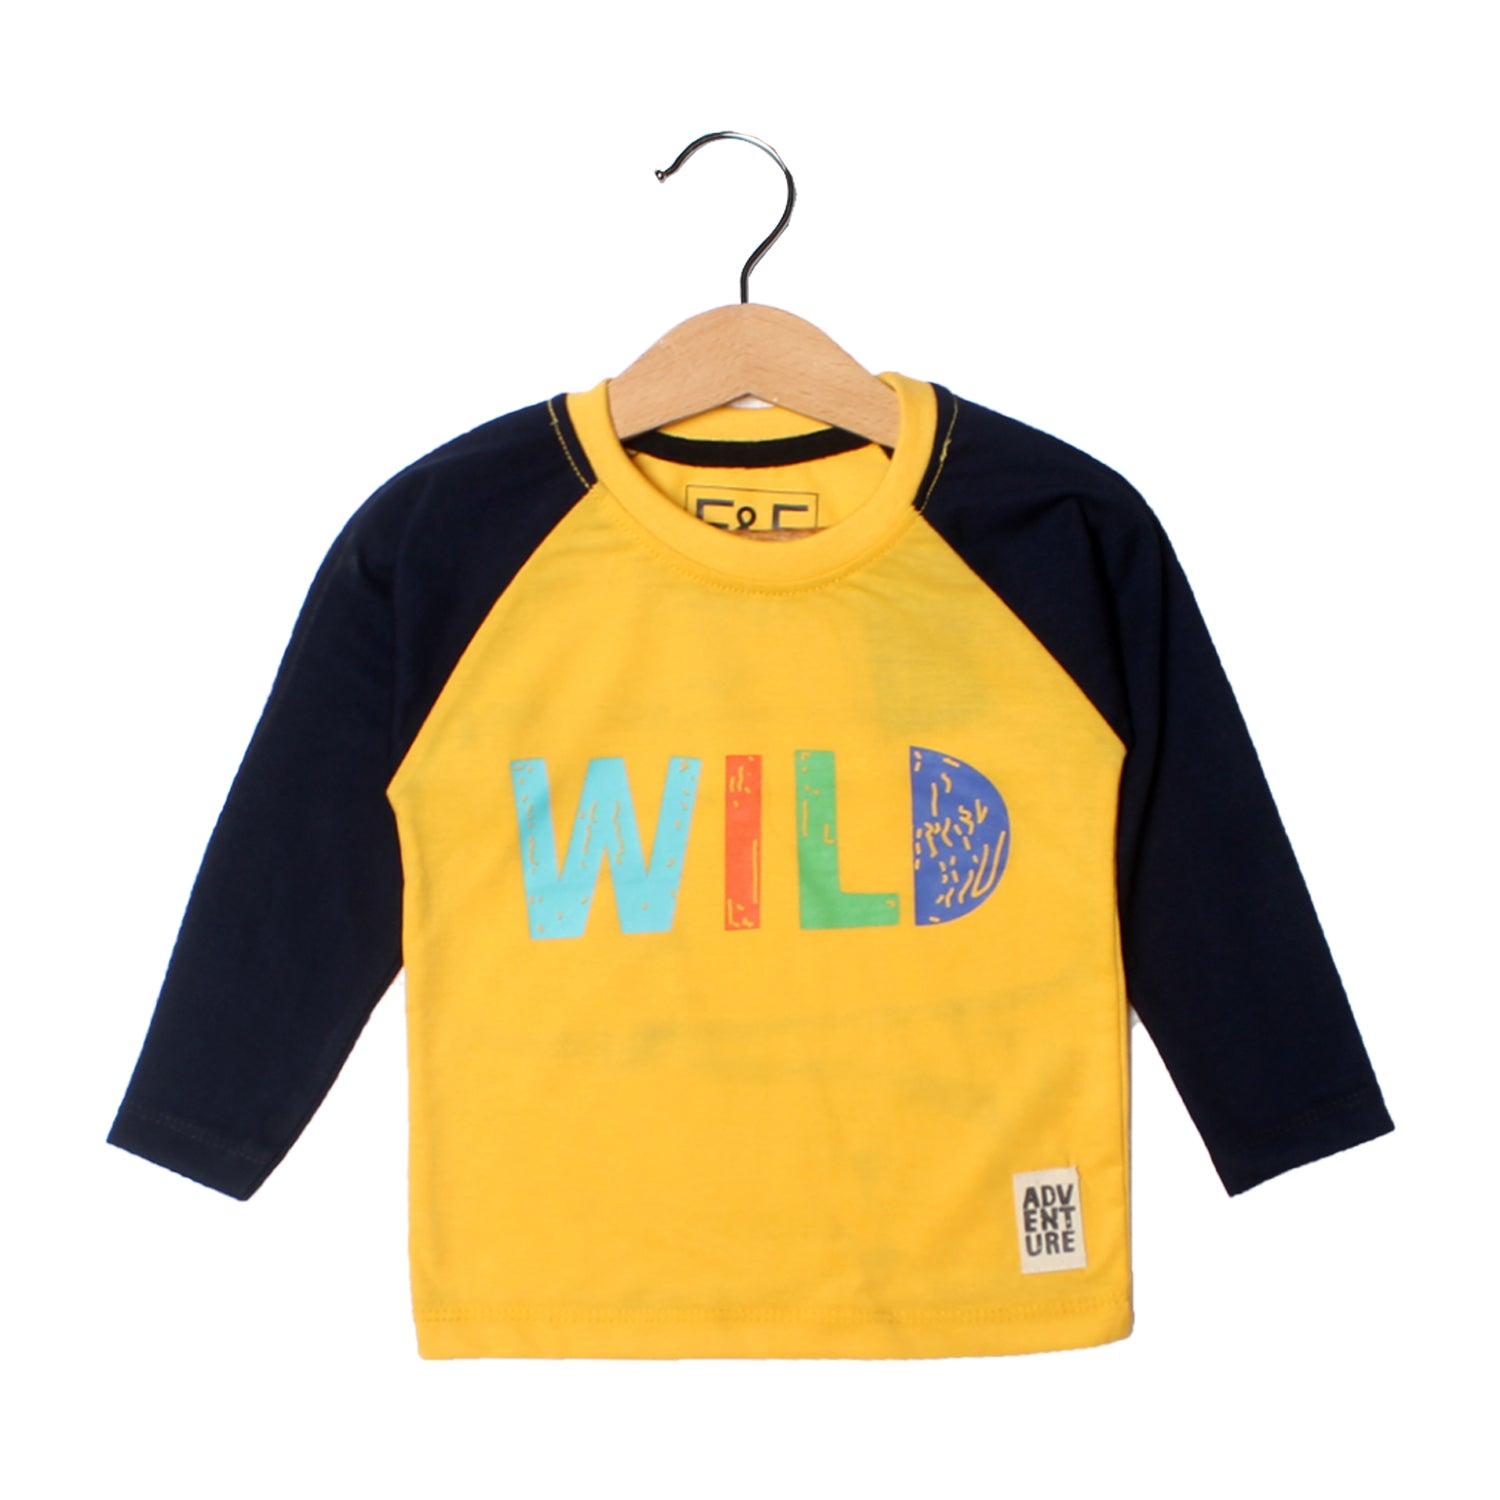 NEW YELLOW WITH BLACK SLEEVES WILD PRINTED FULL SLEEVE T-SHIRT